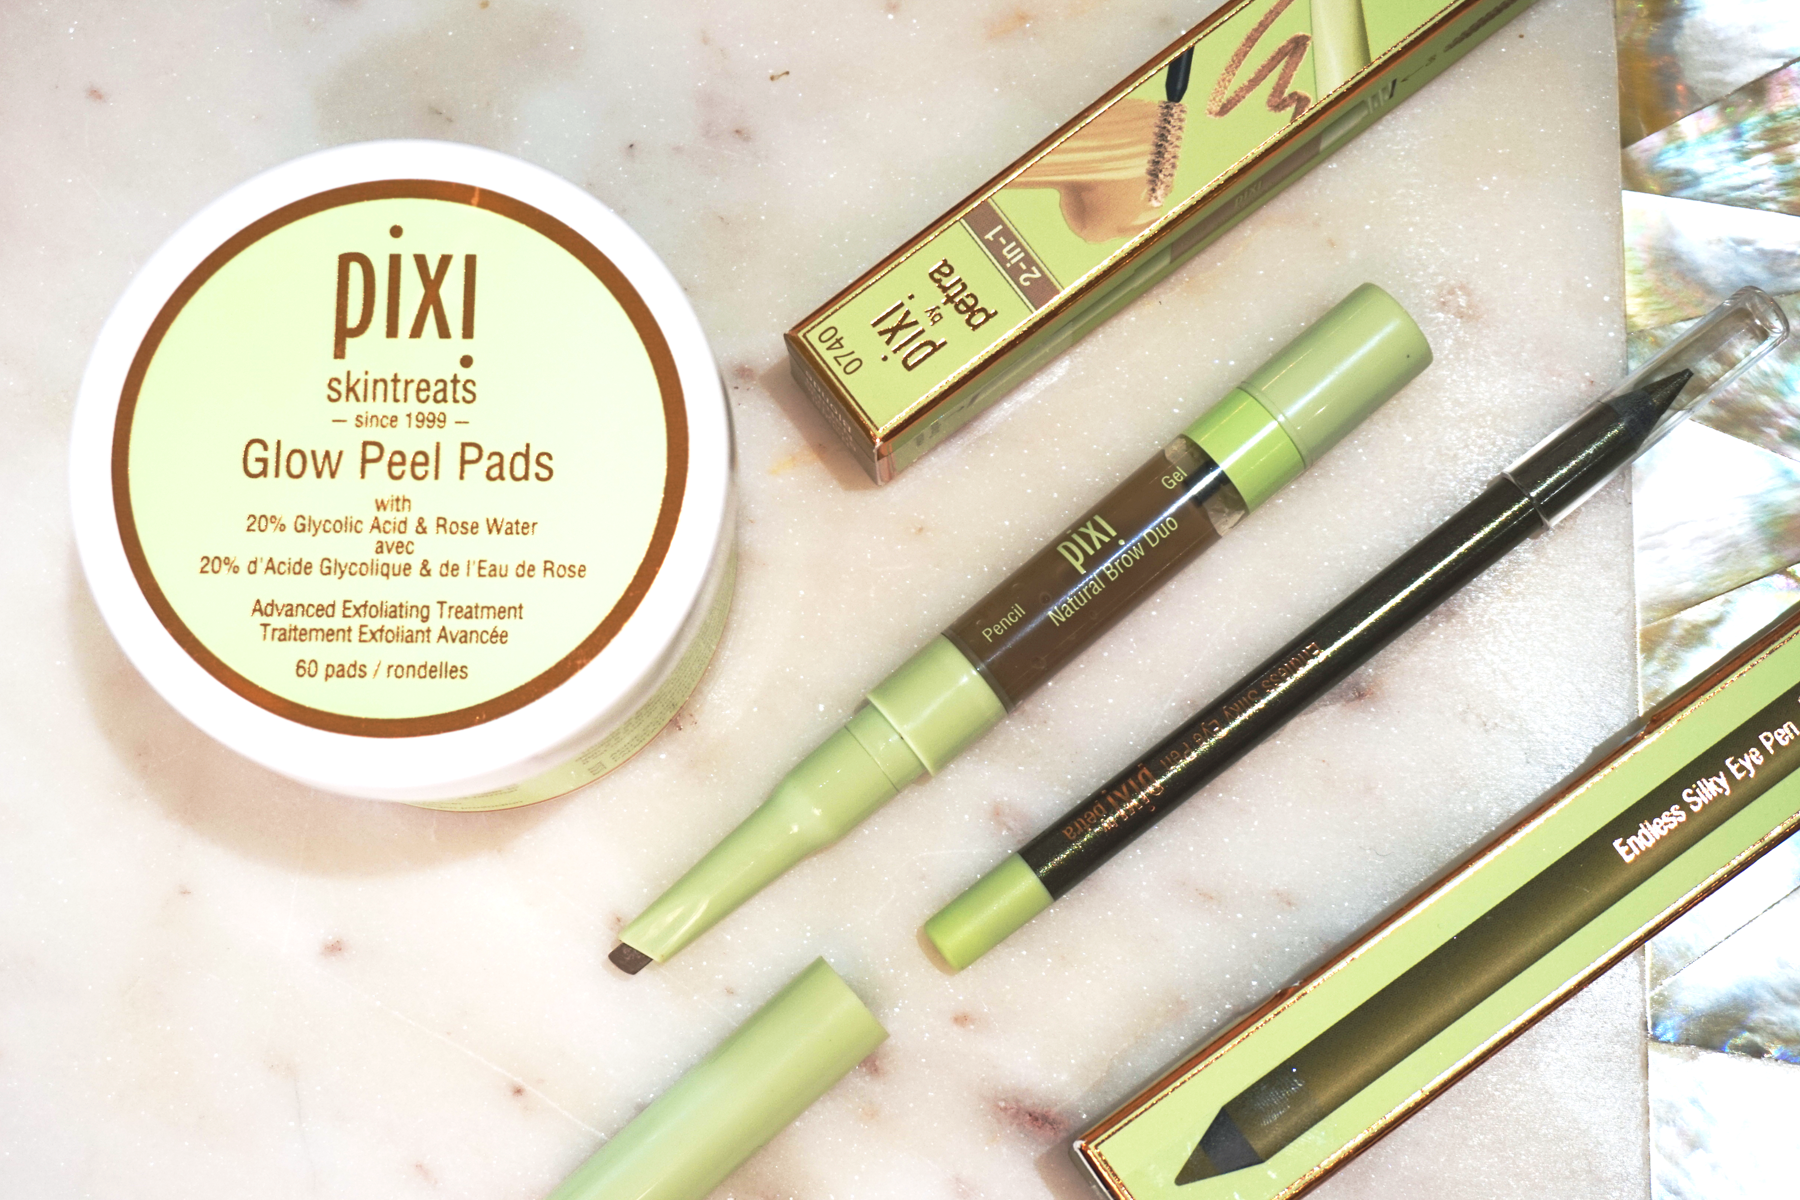 Trying out Pixi Products